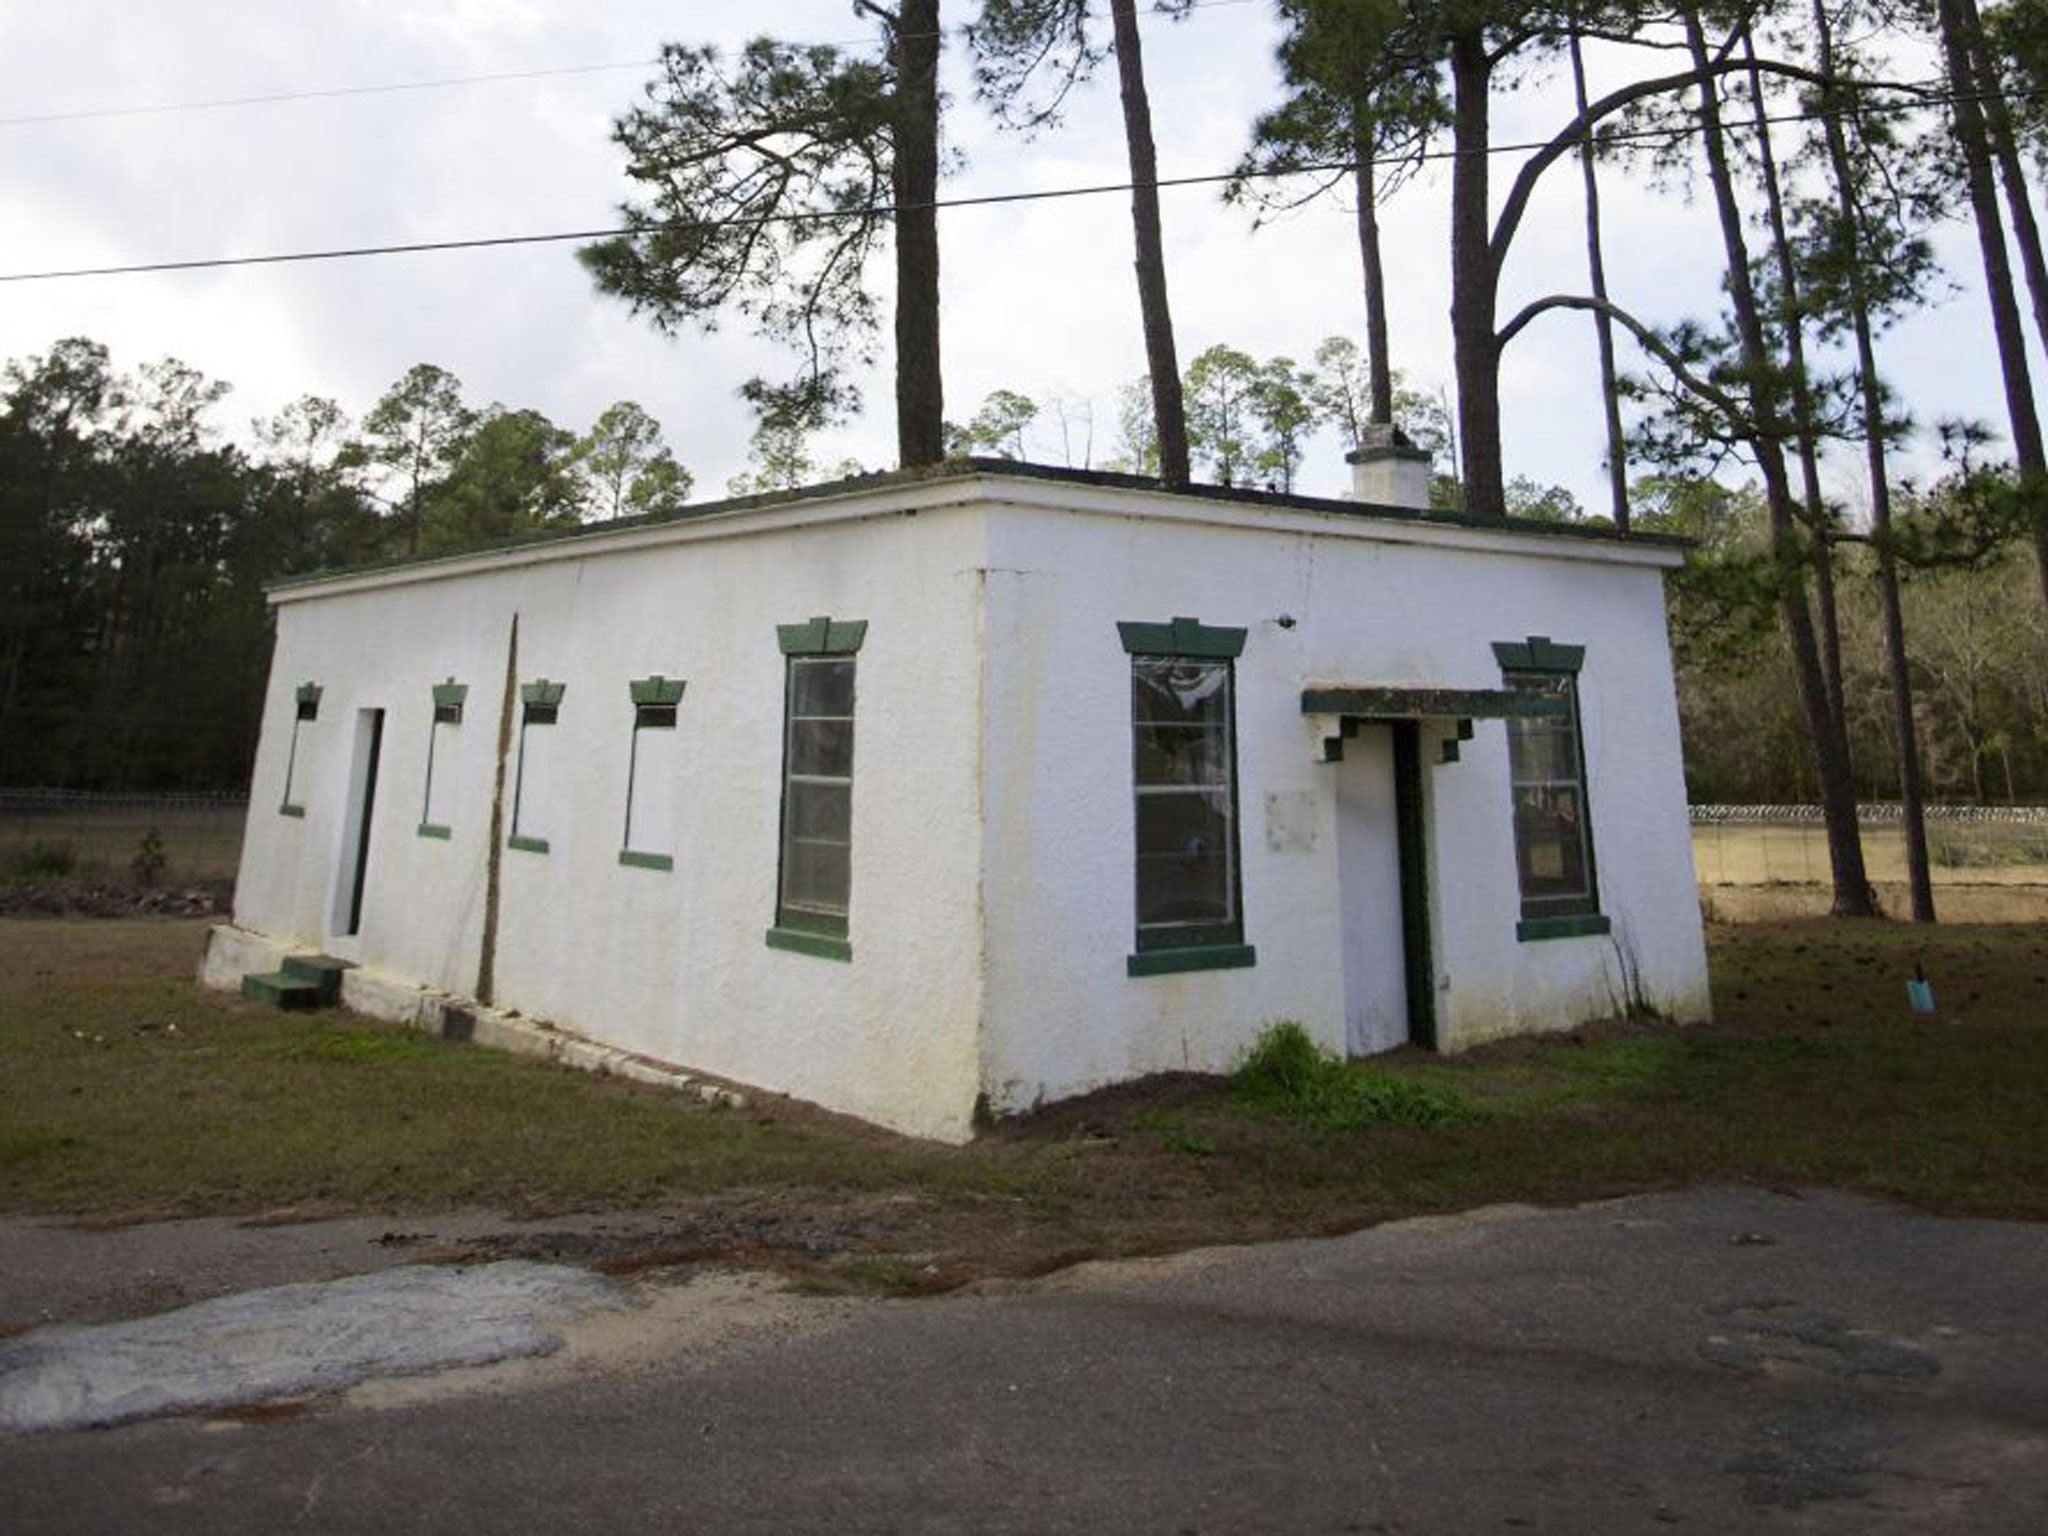 A small building known as the "White House" on the south campus that is alleged to be the site of decades of brutality for students at the Arthur G. Dozier School for Boys, in Marianna